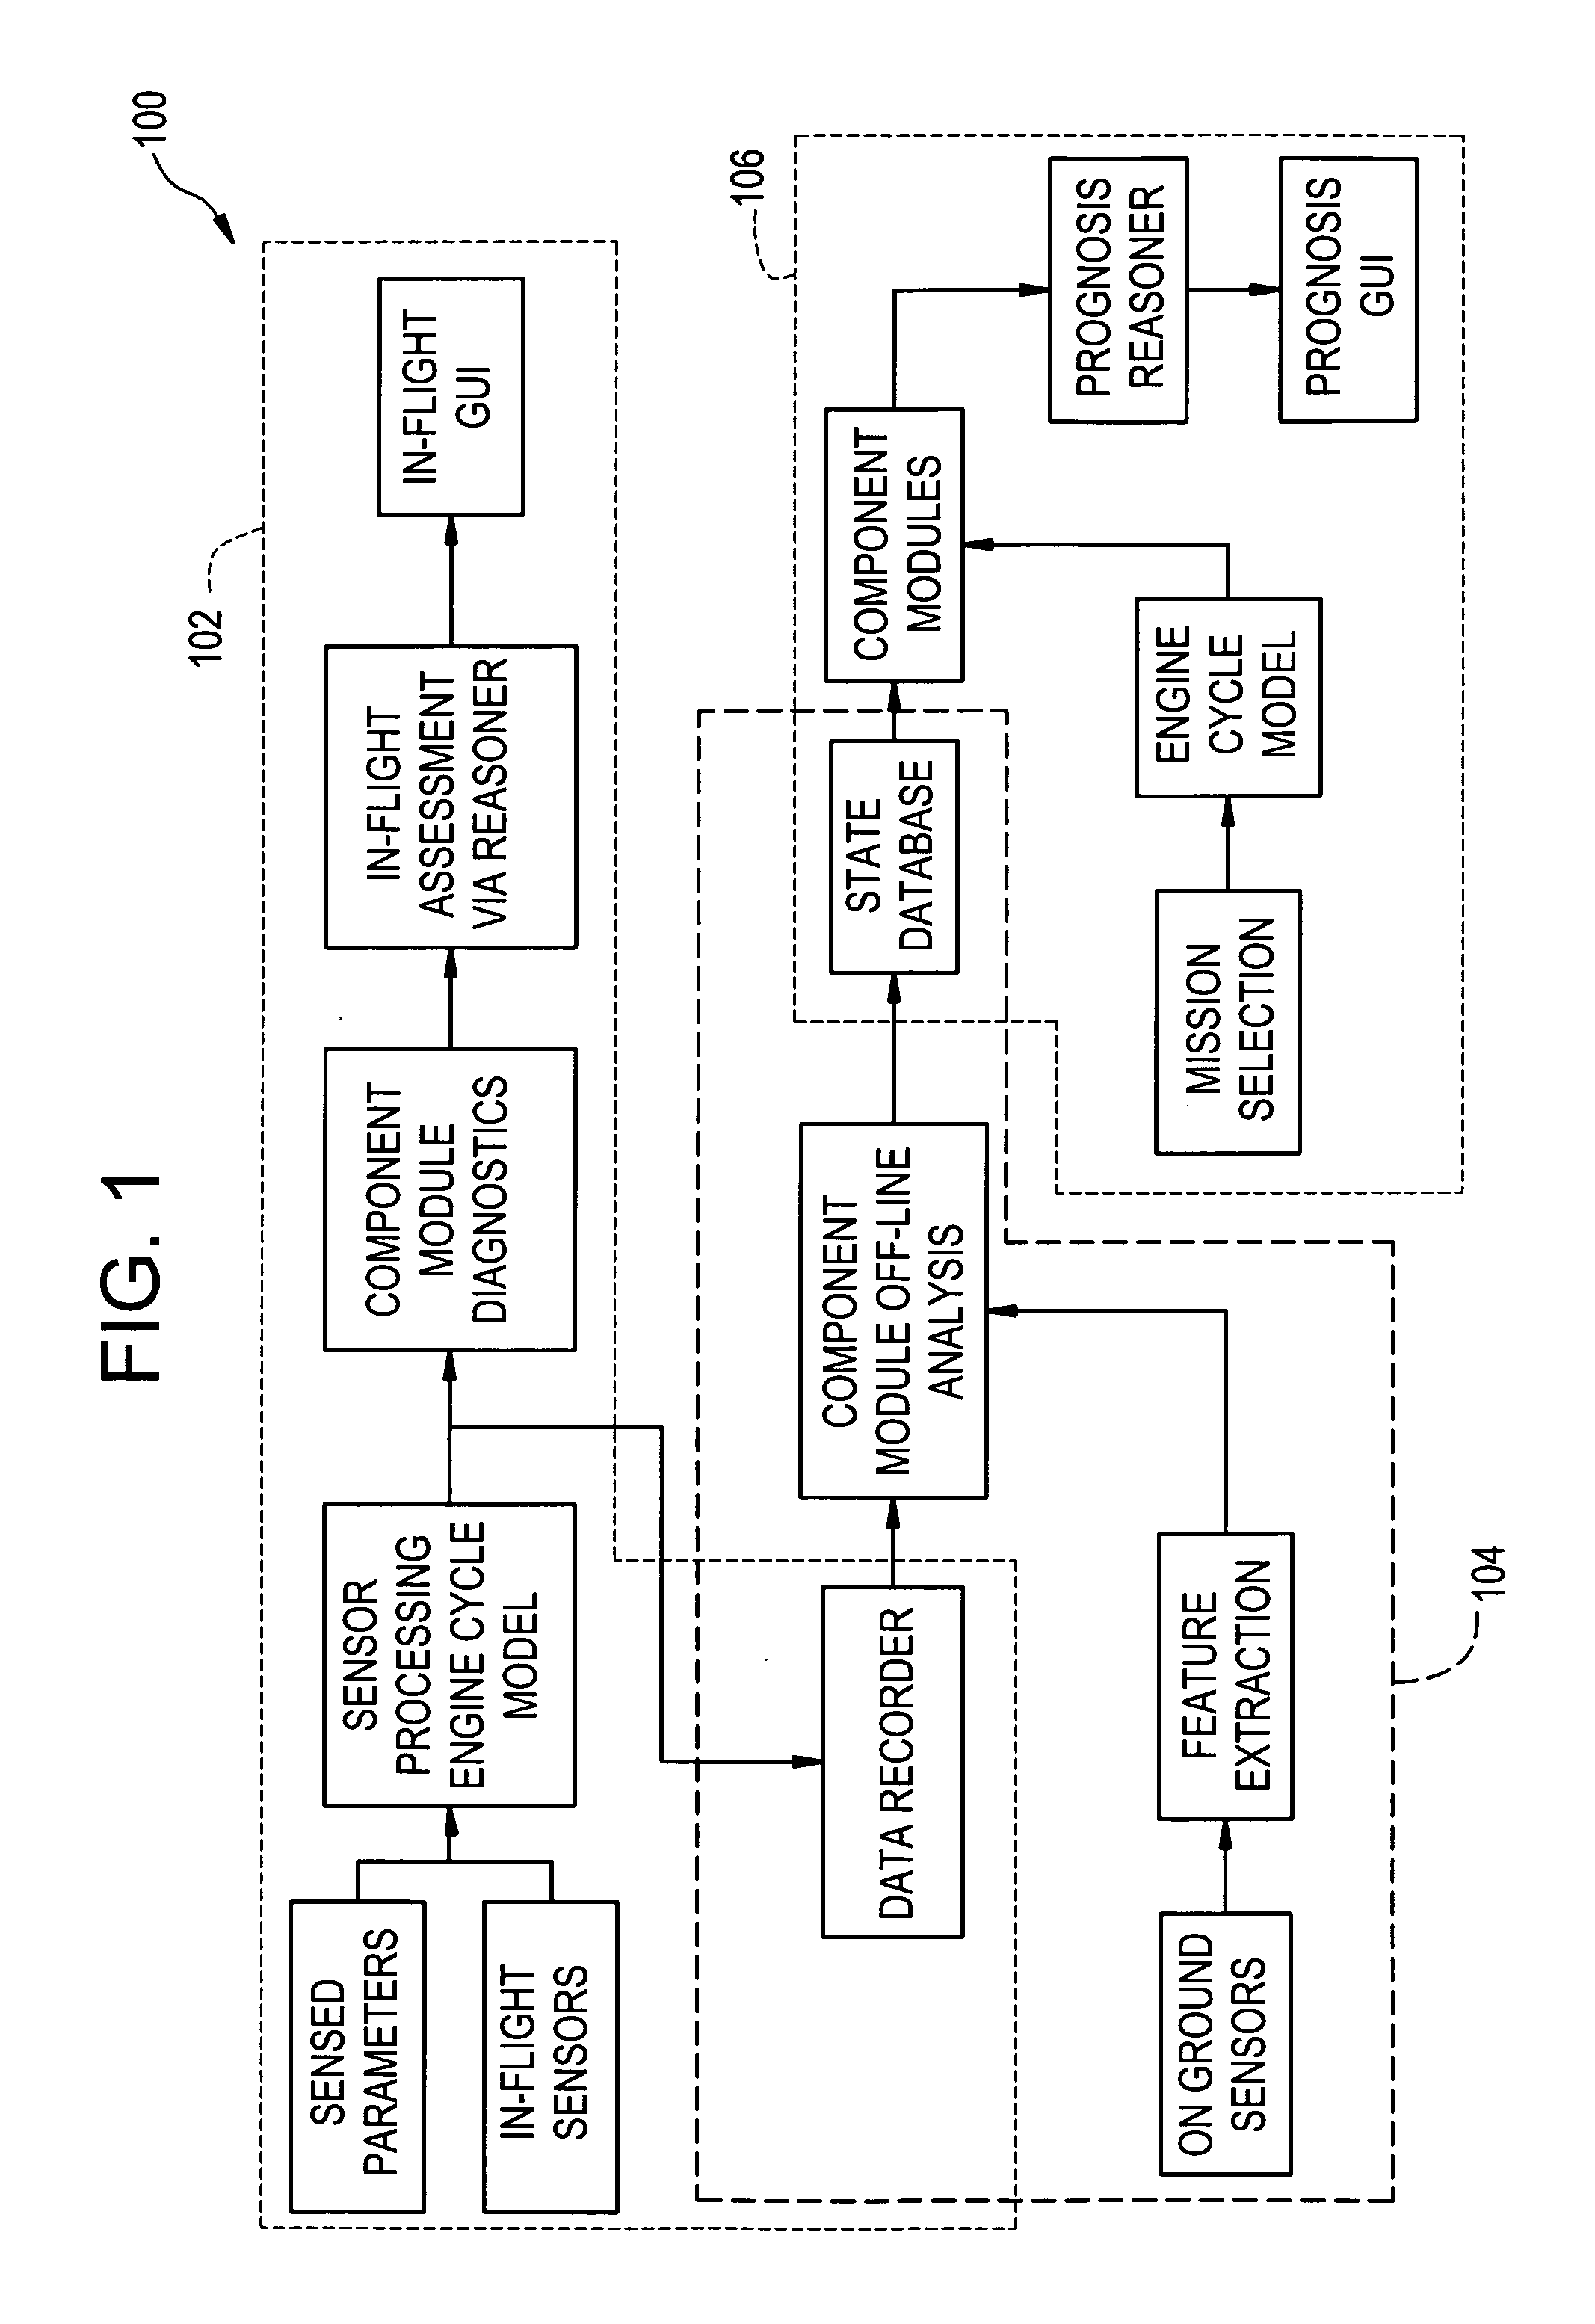 Method, system, and computer program product for performing prognosis and asset management services